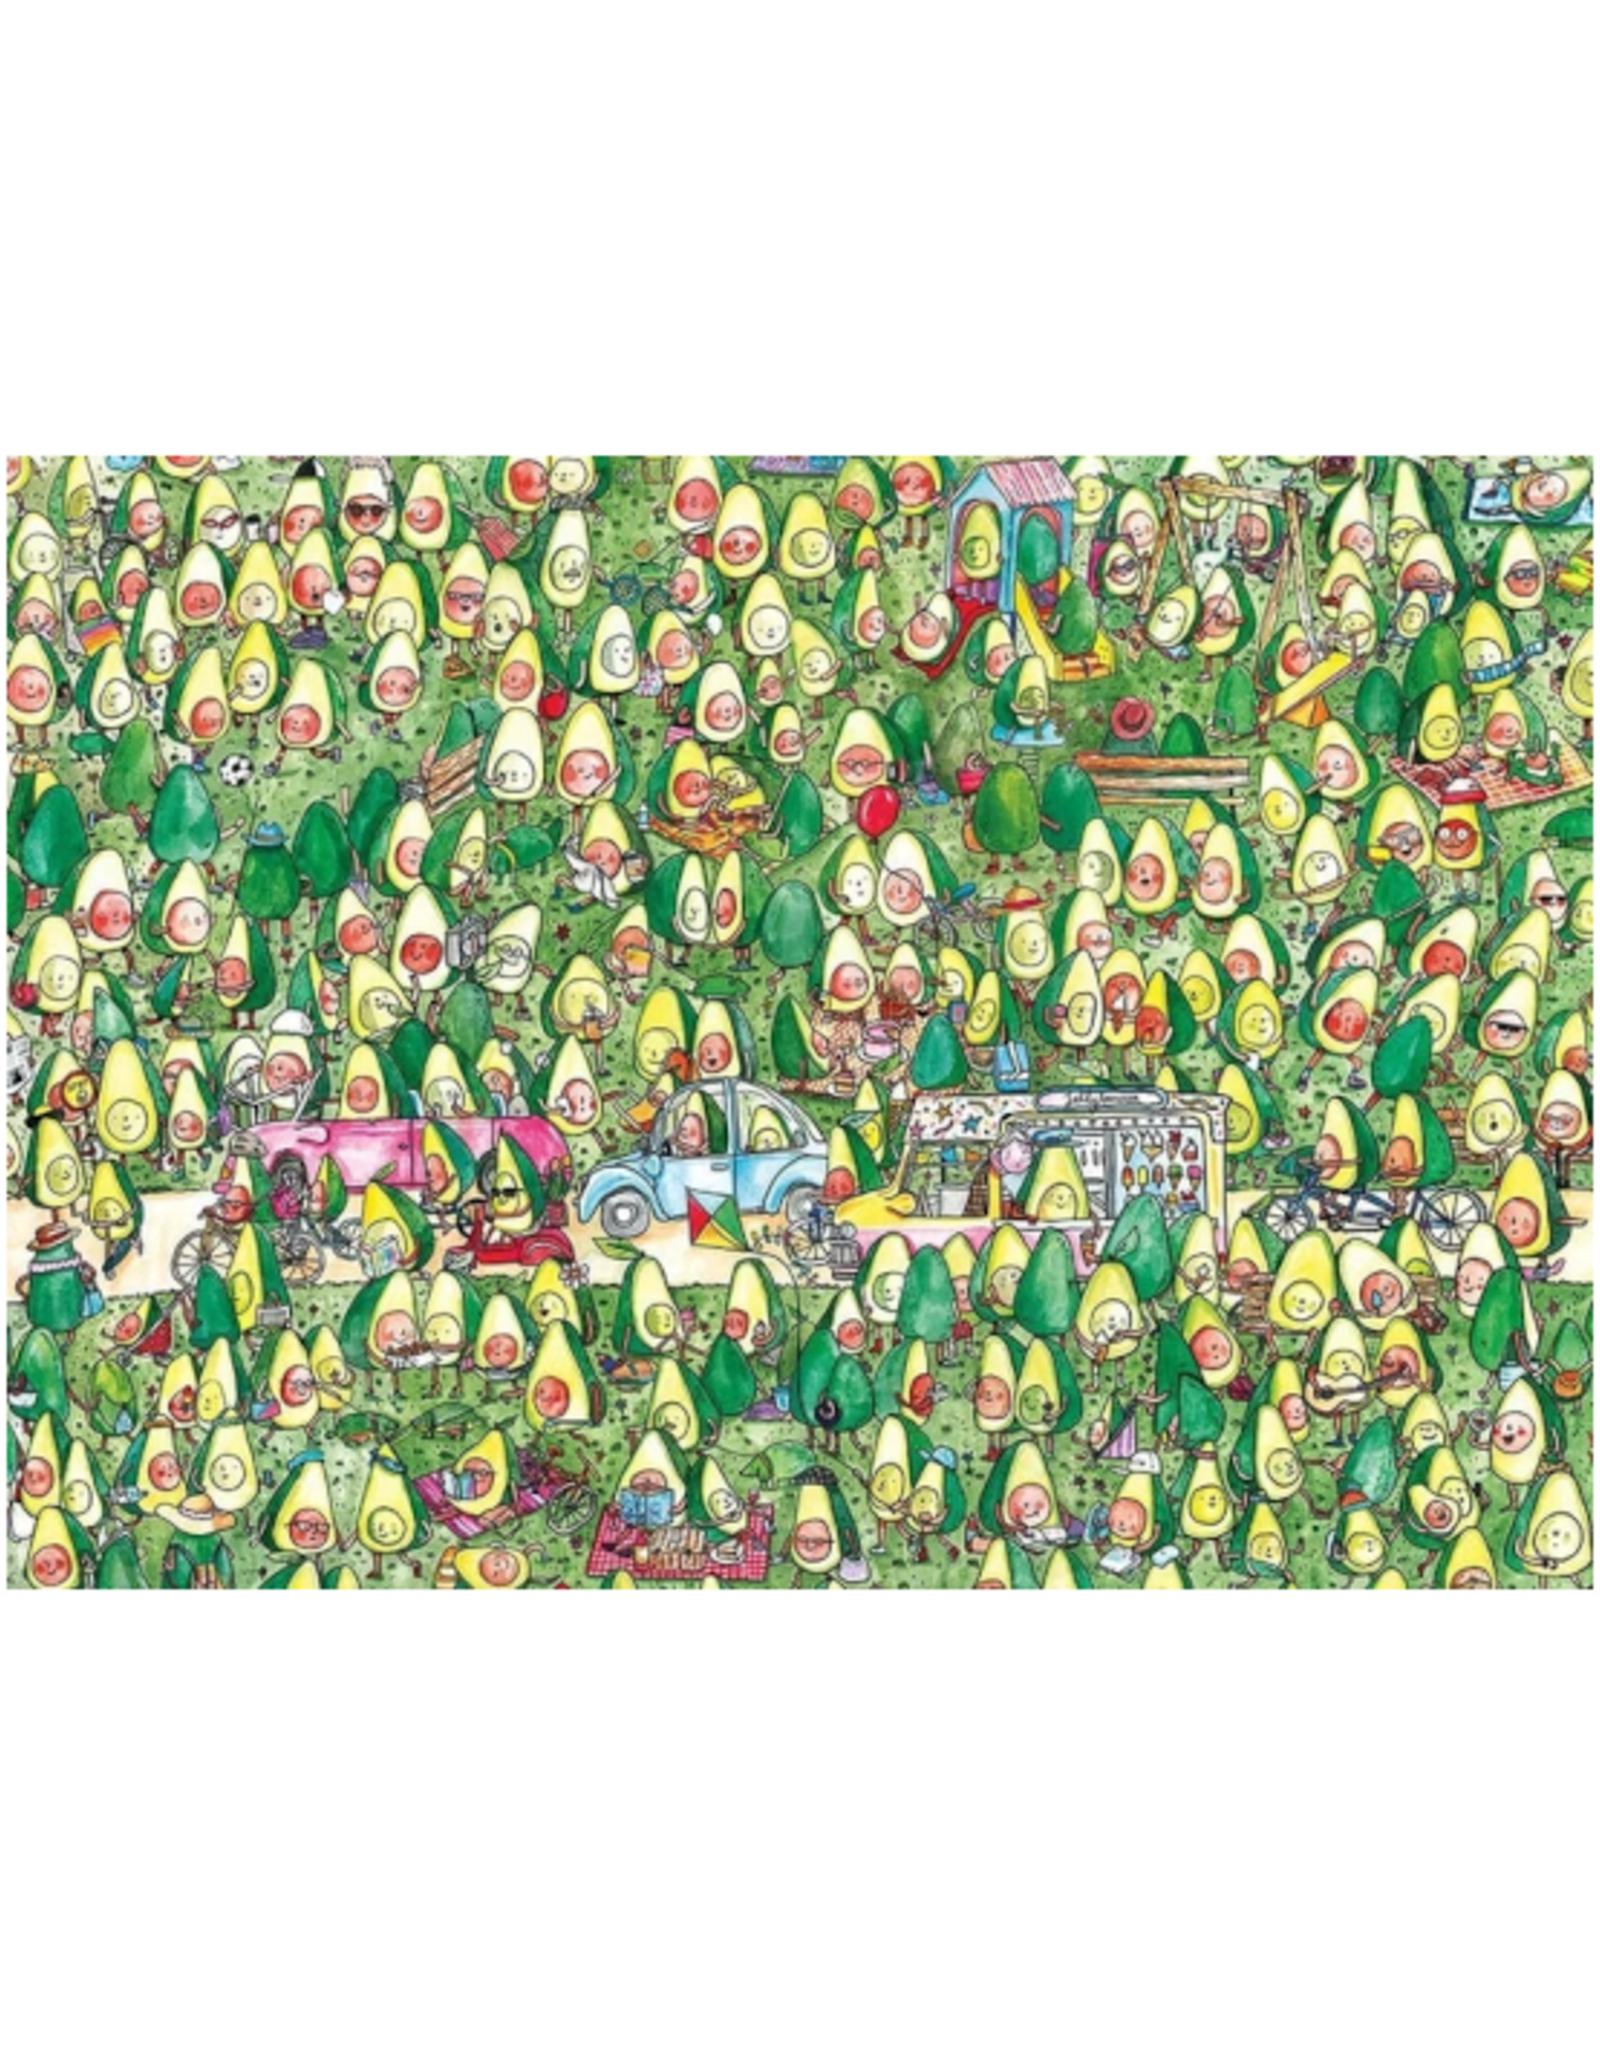 Gibsons Gibsons - 1000pcs - Avocado Park